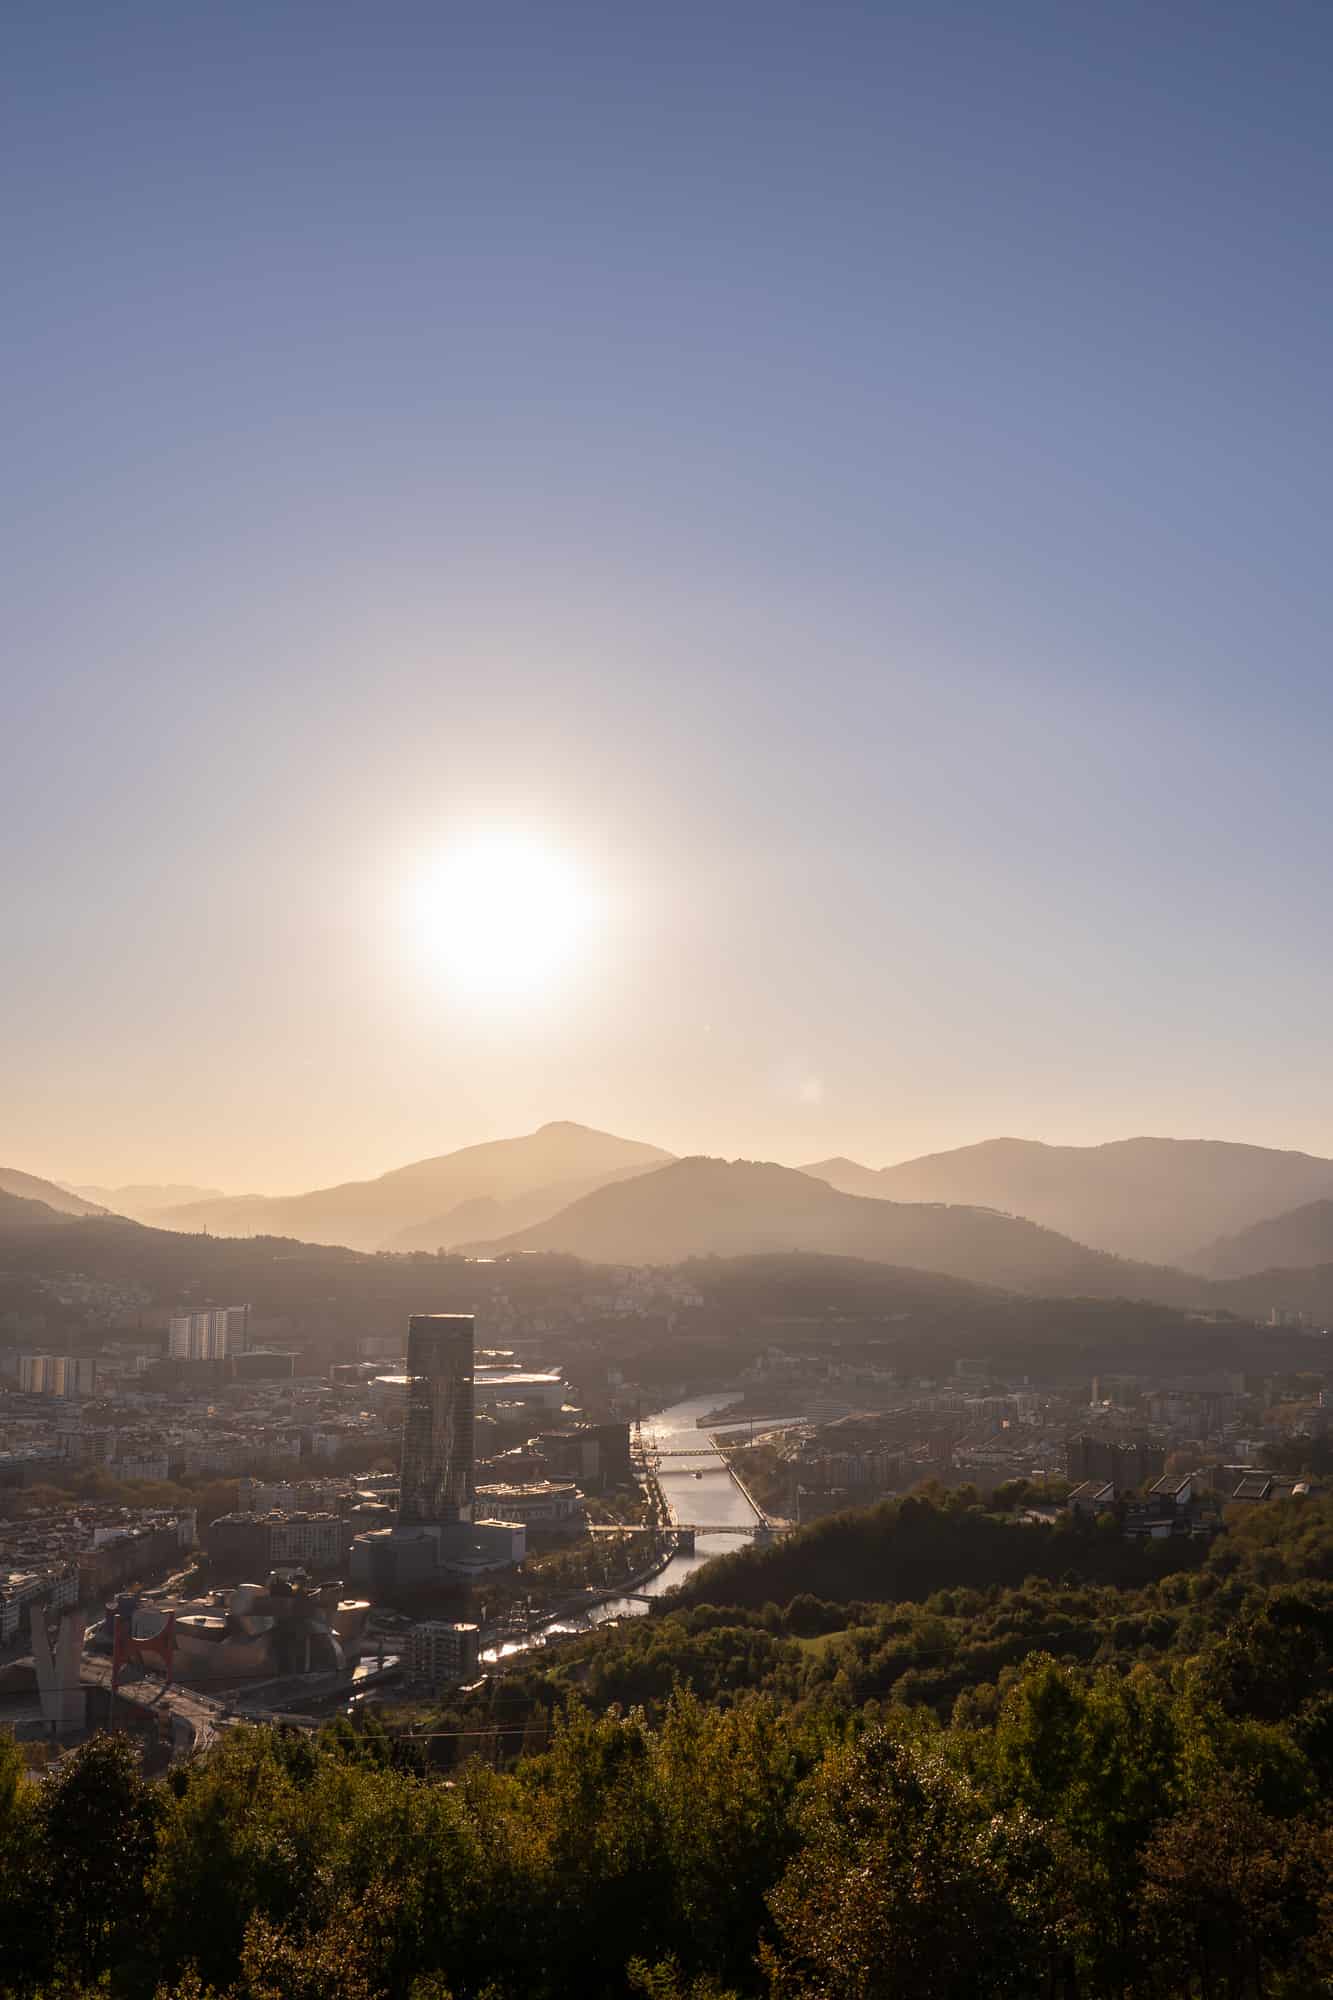 A vertical aerial view of the city of Bilbao in the Basque Country at sunset